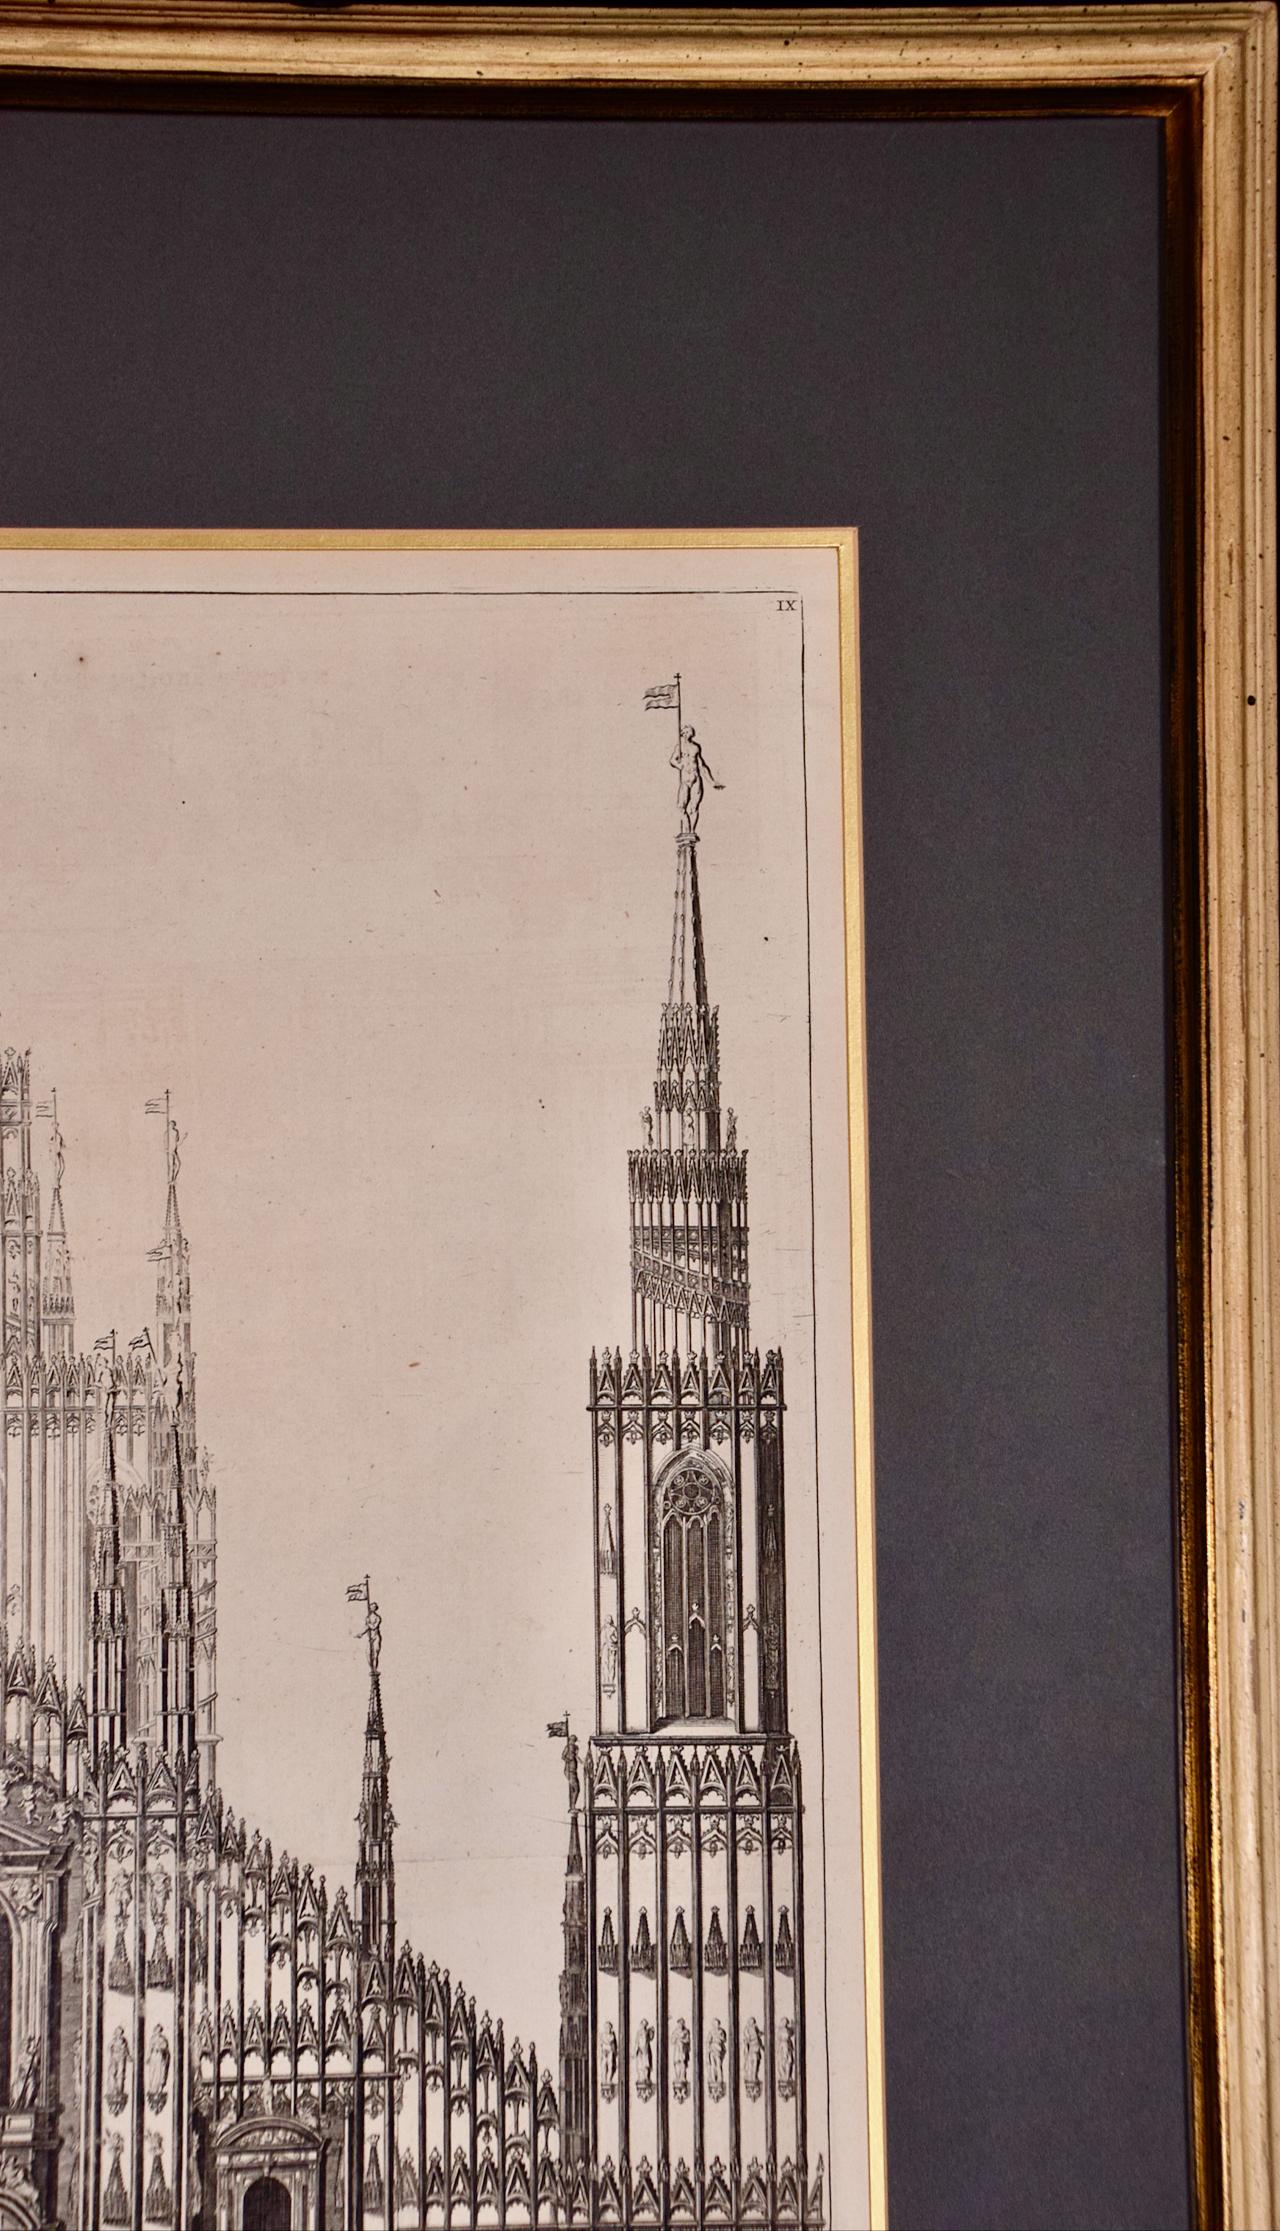 Milan Cathedral: A Framed 1704 Architectural Rendering by Mortier after Blaeu 1